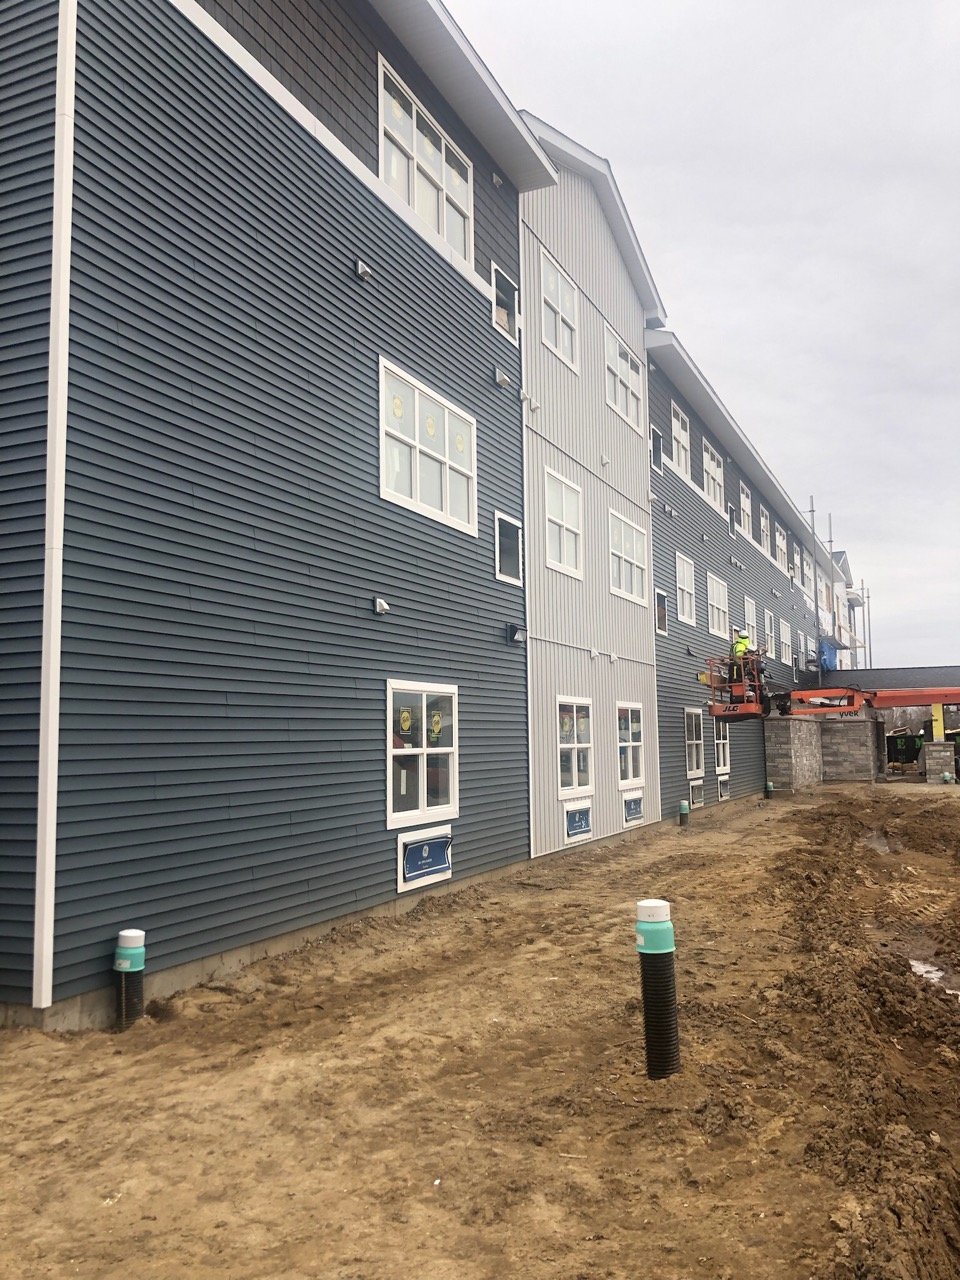 Exterior of building nearly complete